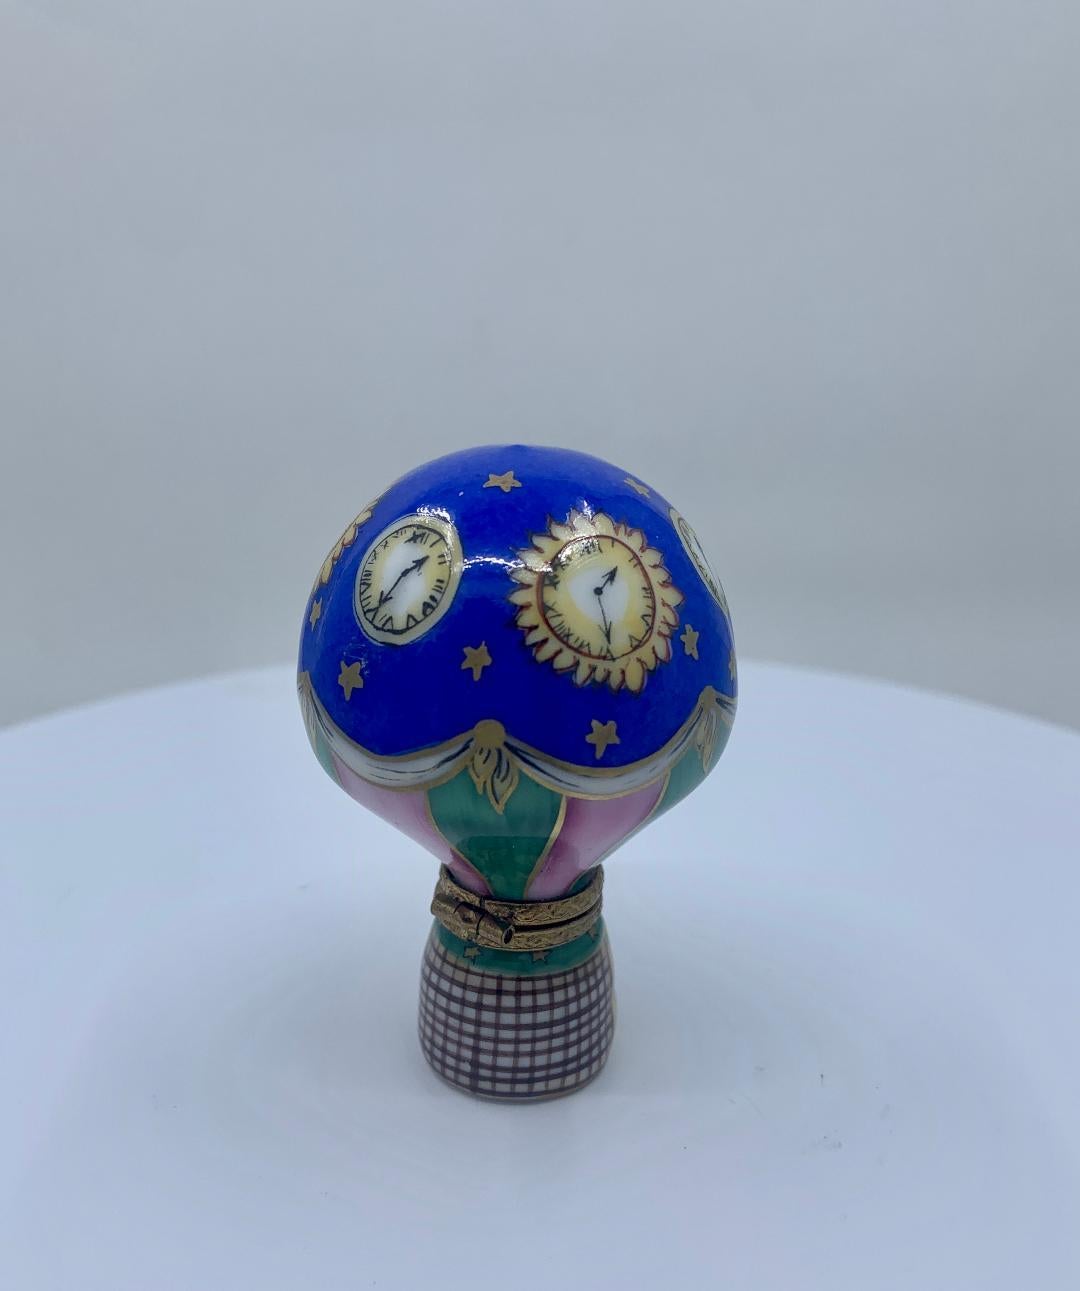 French Unique Limoges Rochard France Hand Painted Hot Air Balloon Porcelain Trinket Box